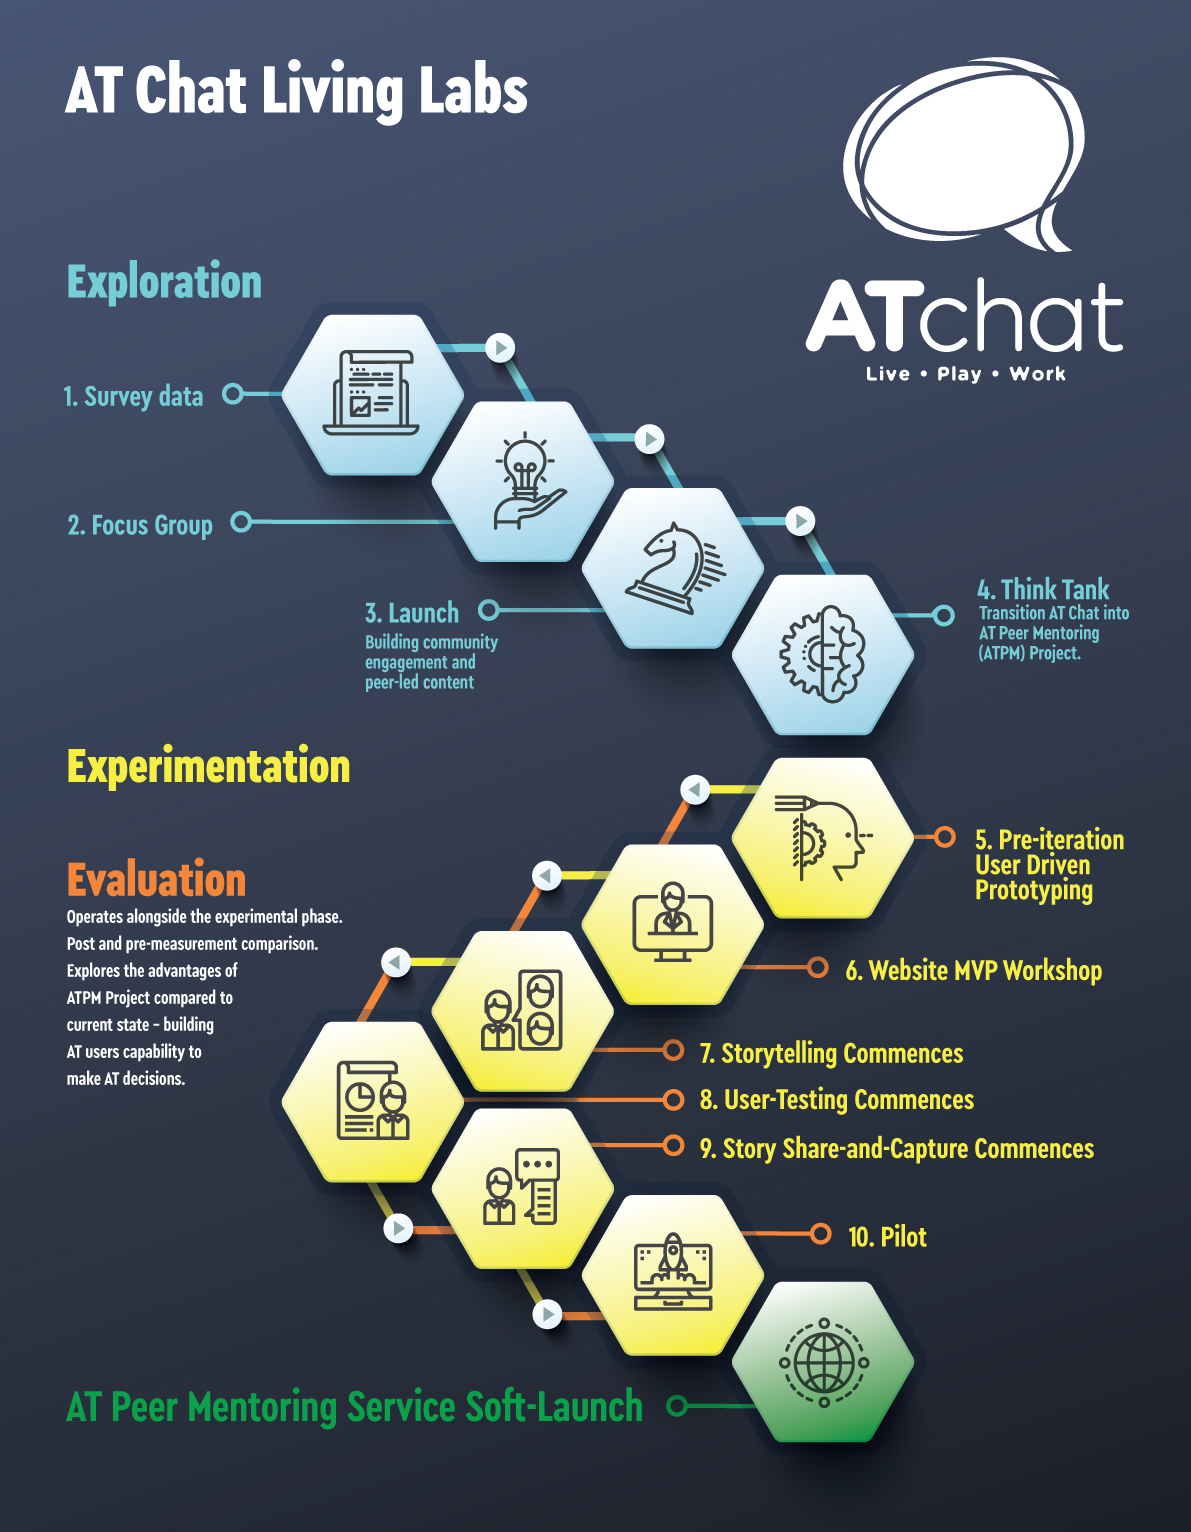 A series of hexagons shaped in a timeline outlining AT Chat's living labs approach of exploration, experimentation, evaluation